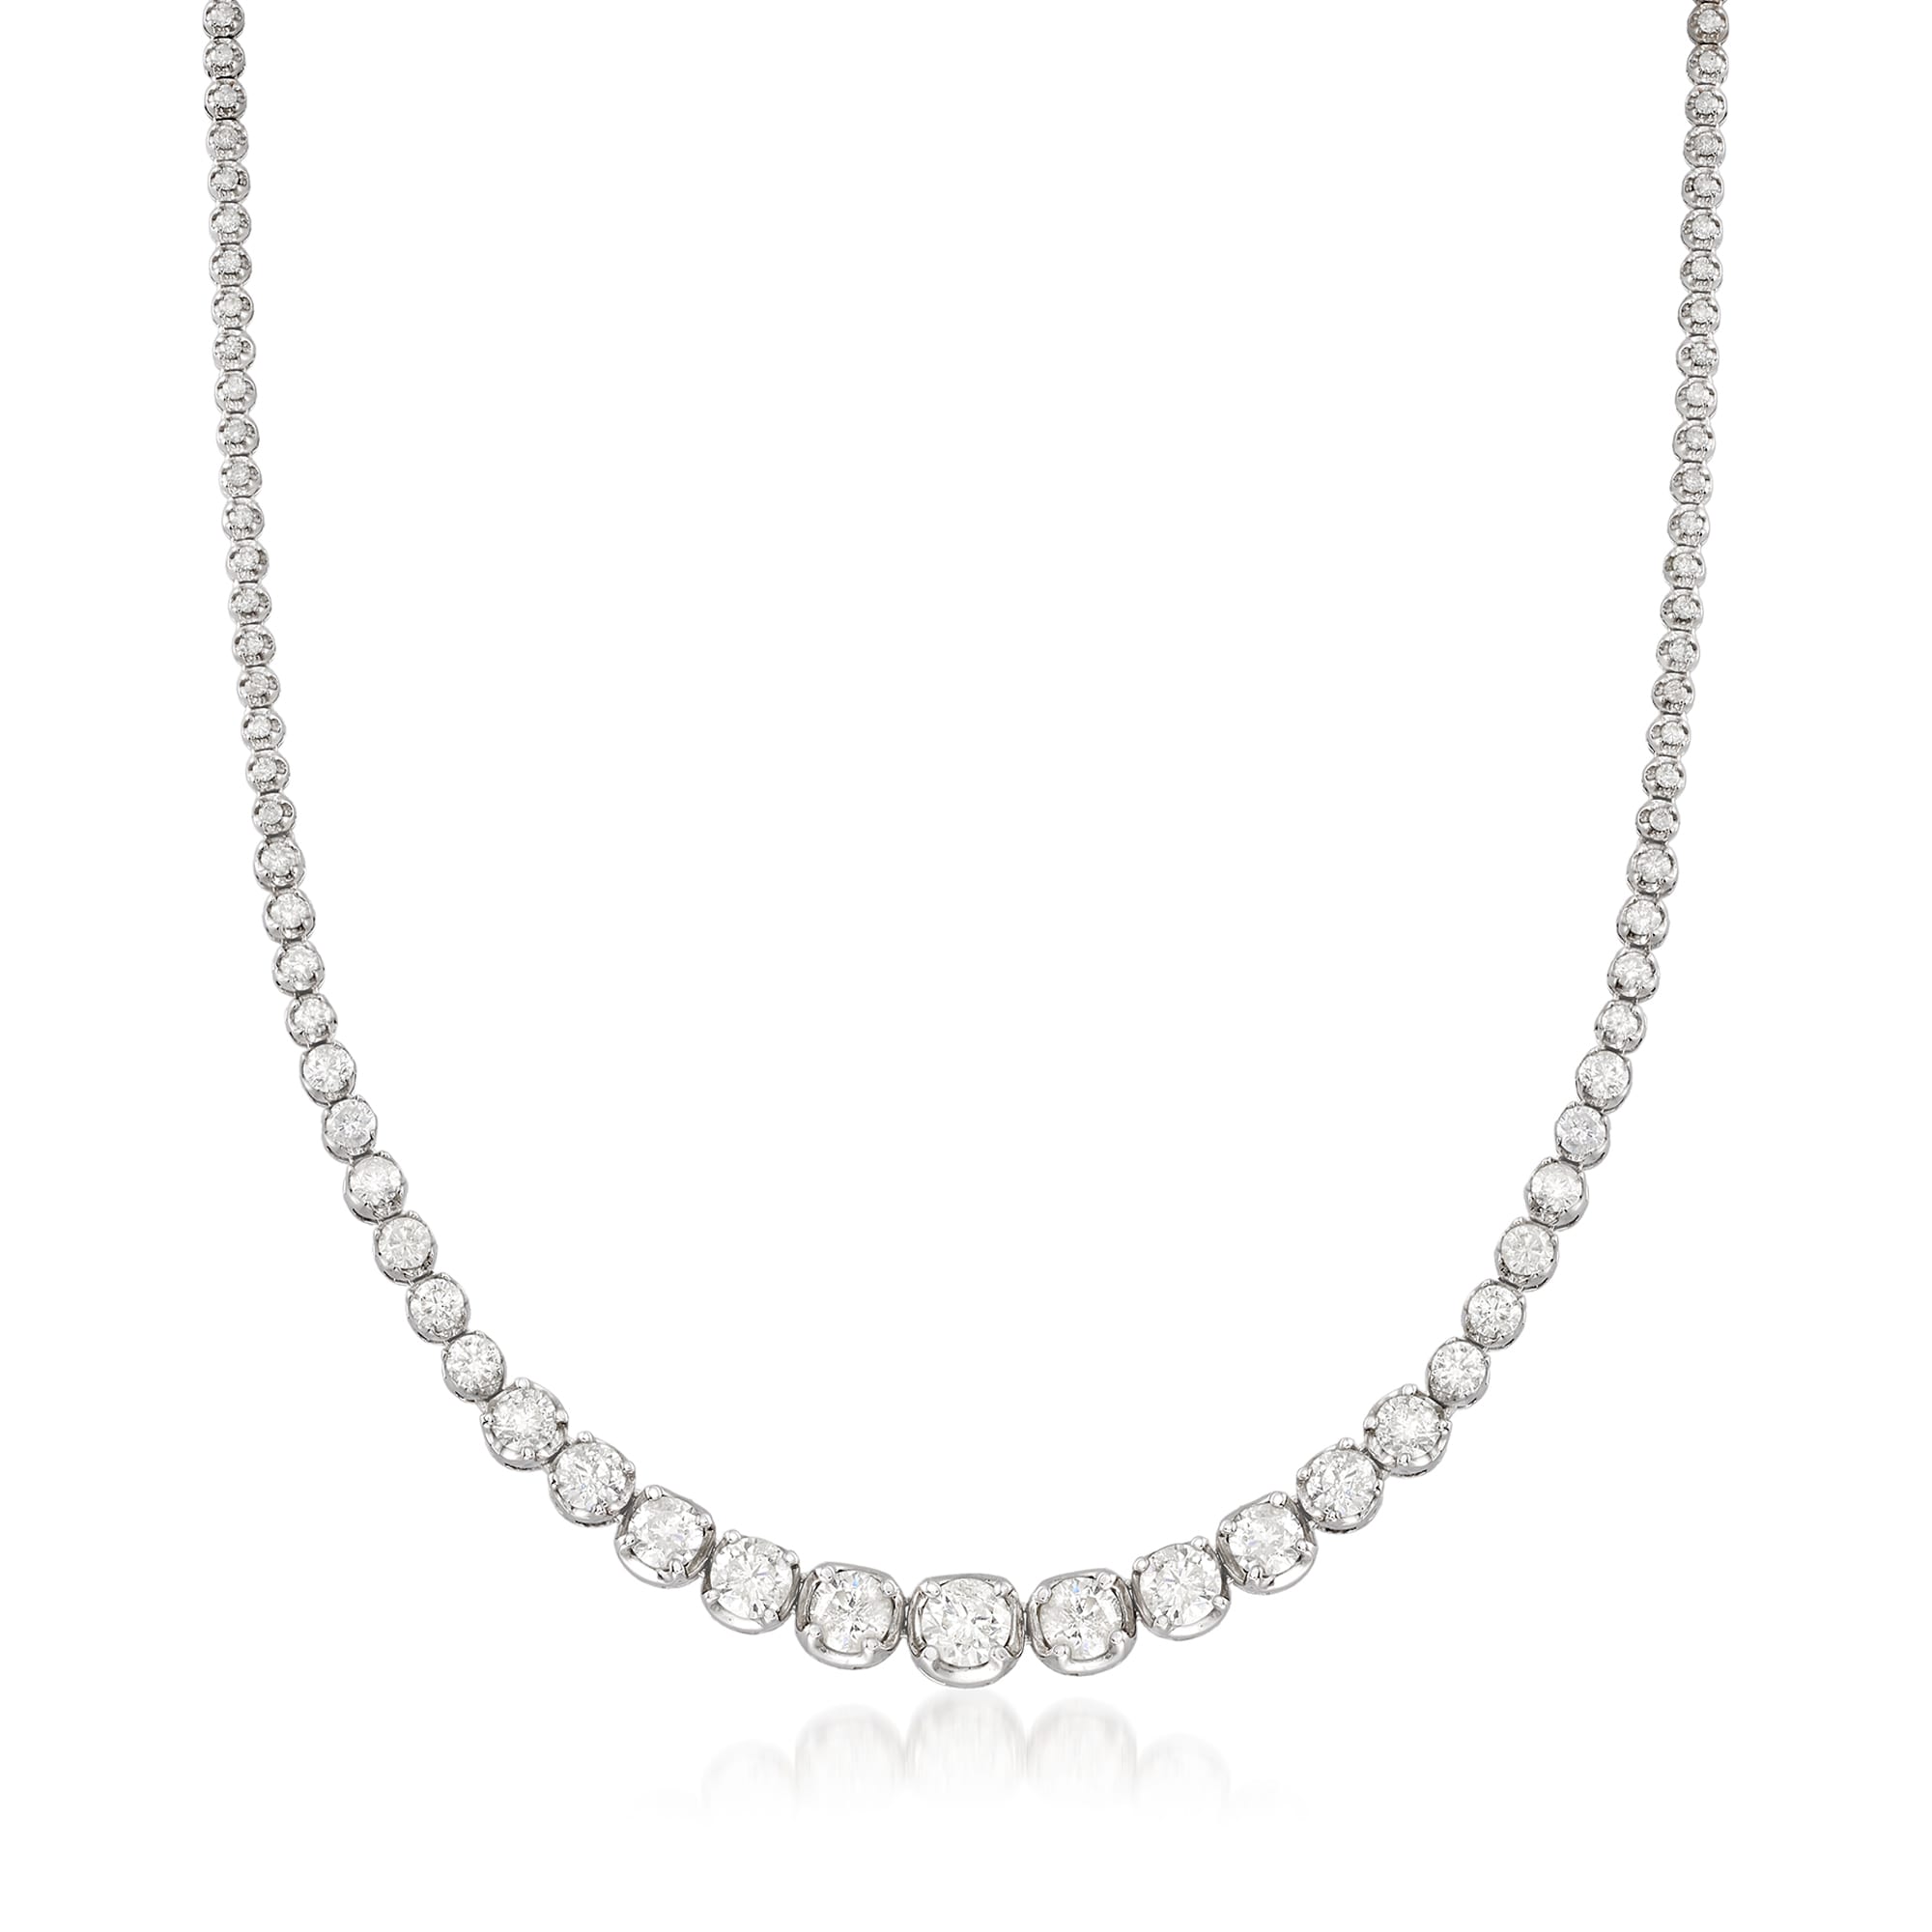 10.00 ct. t.w. Graduated Diamond Tennis Necklace in 14kt White Gold ...